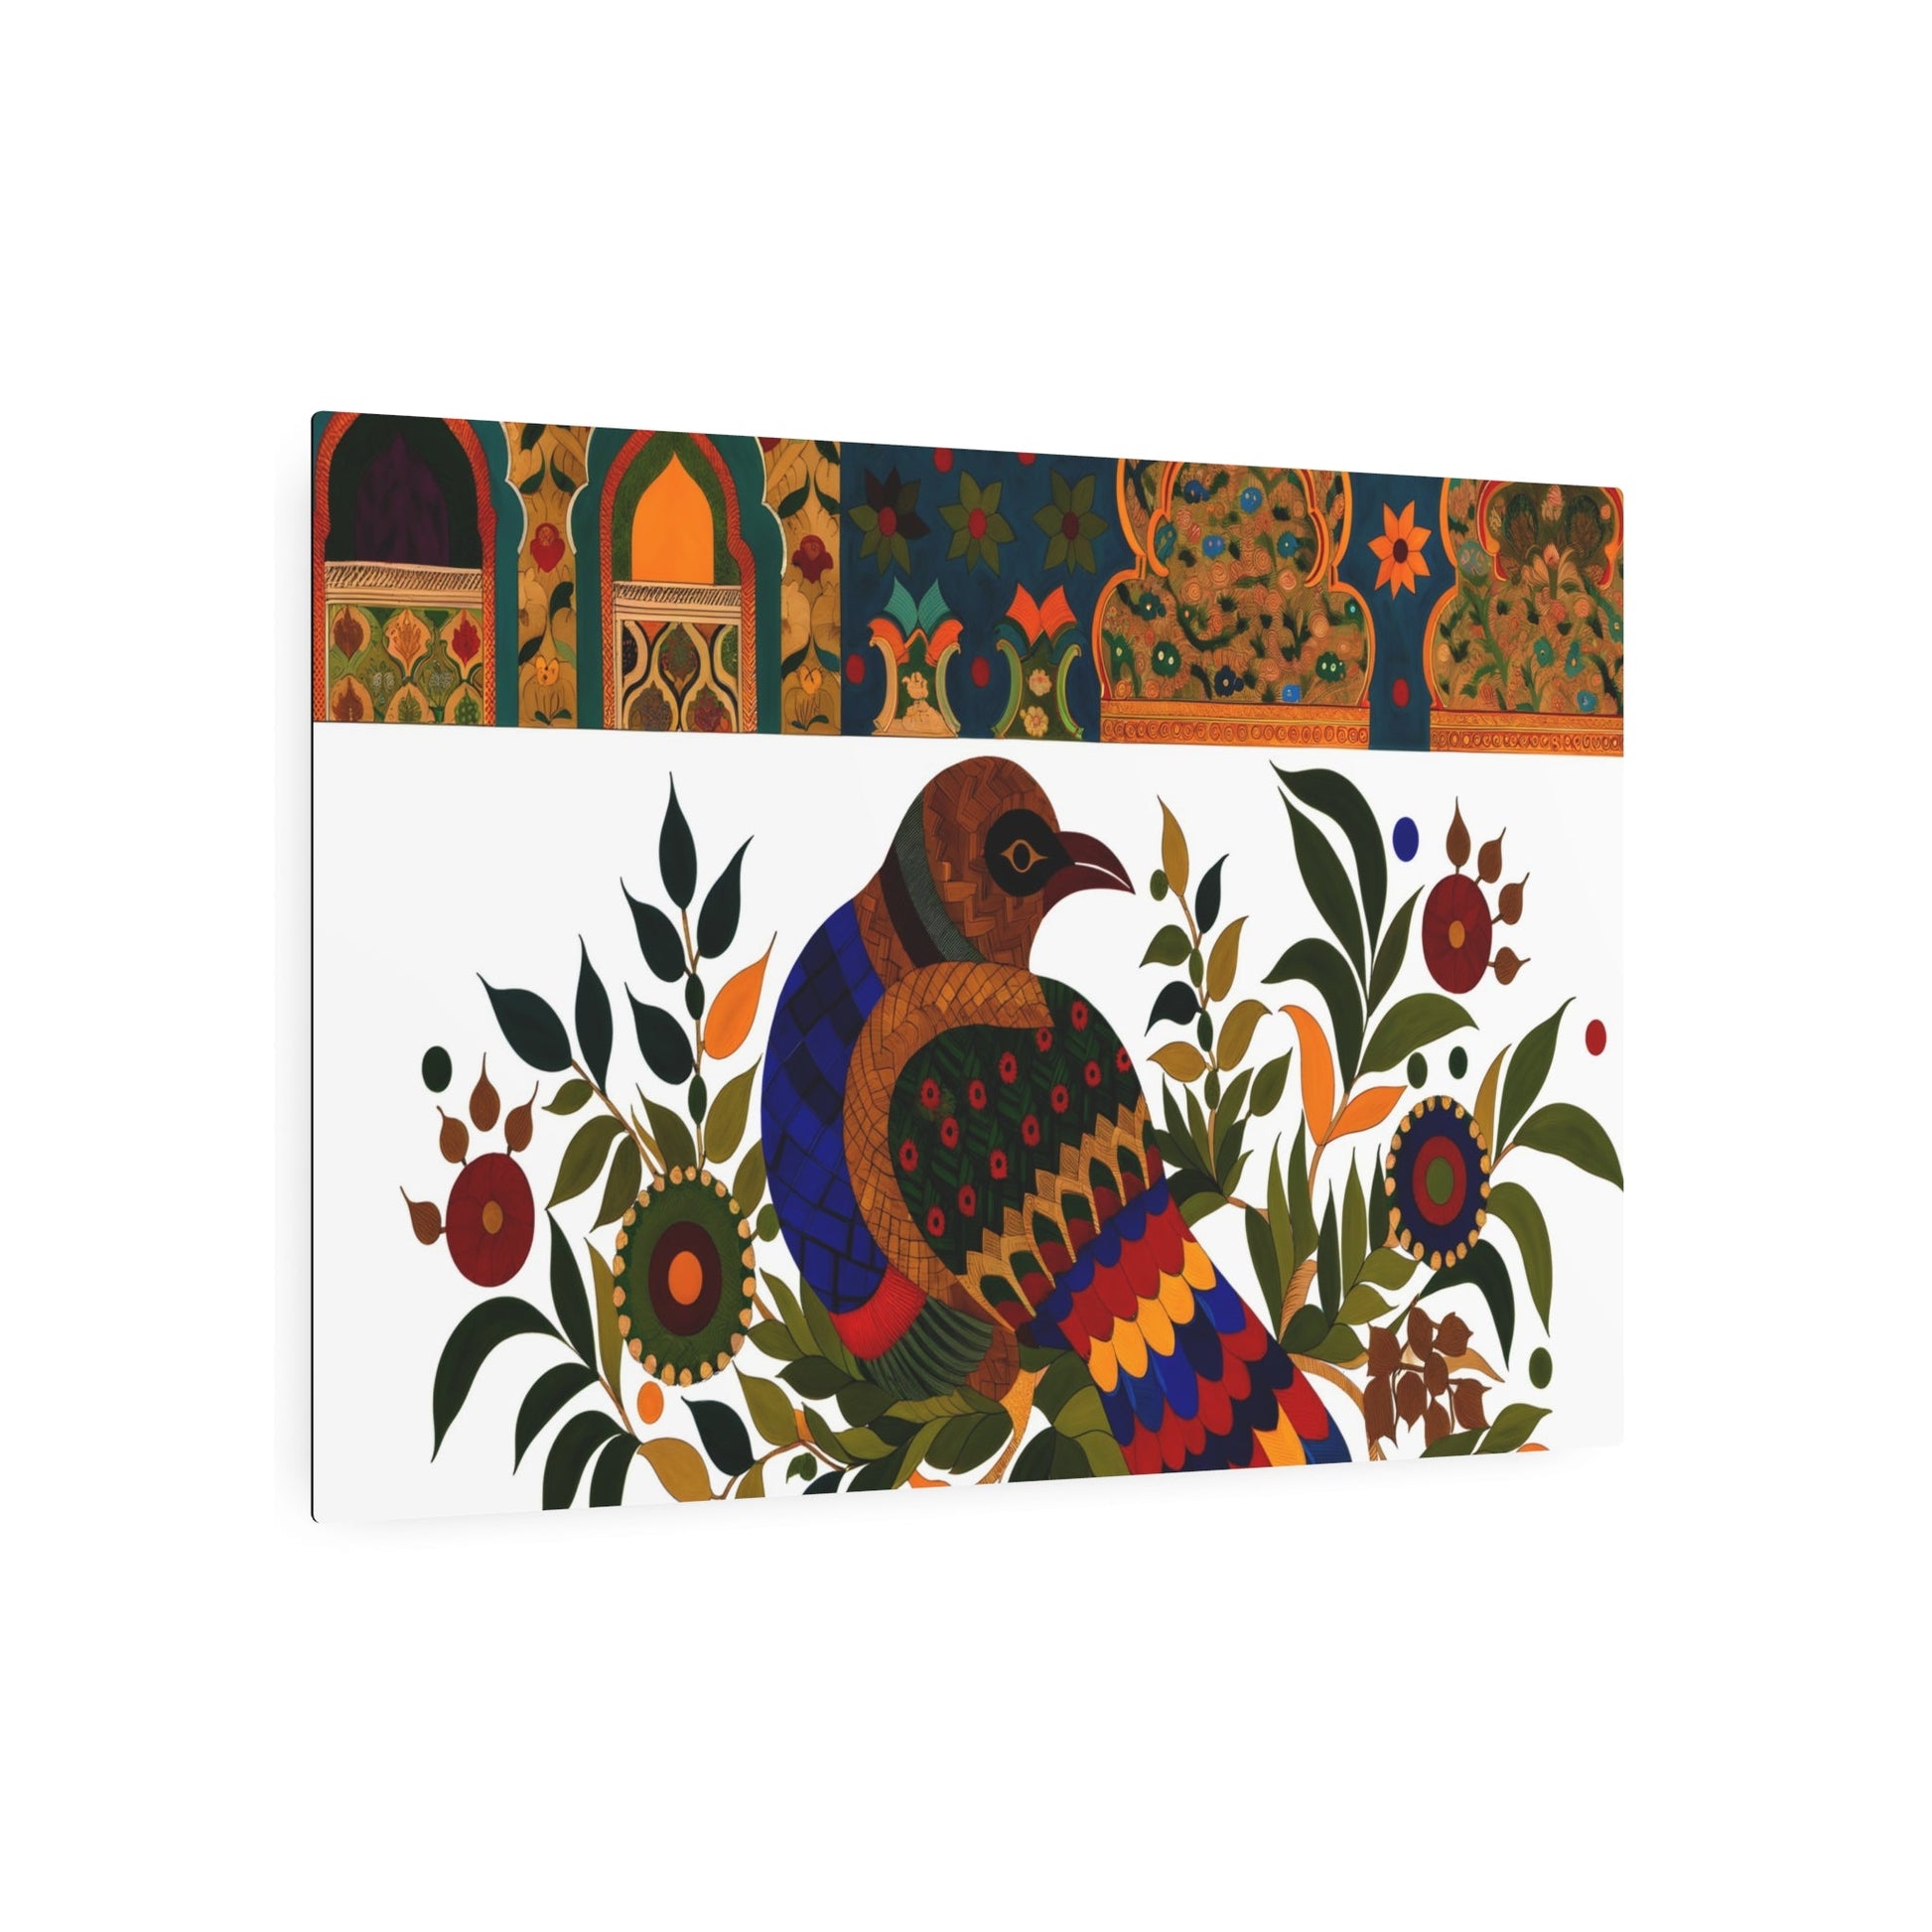 Metal Poster Art | "Mughal Miniature South Asian Art - Vibrant Bird-Centric Painting with Ornate Patterns and Architectural Details Reflecting Mughal Era Op - Metal Poster Art 36″ x 24″ (Horizontal) 0.12''